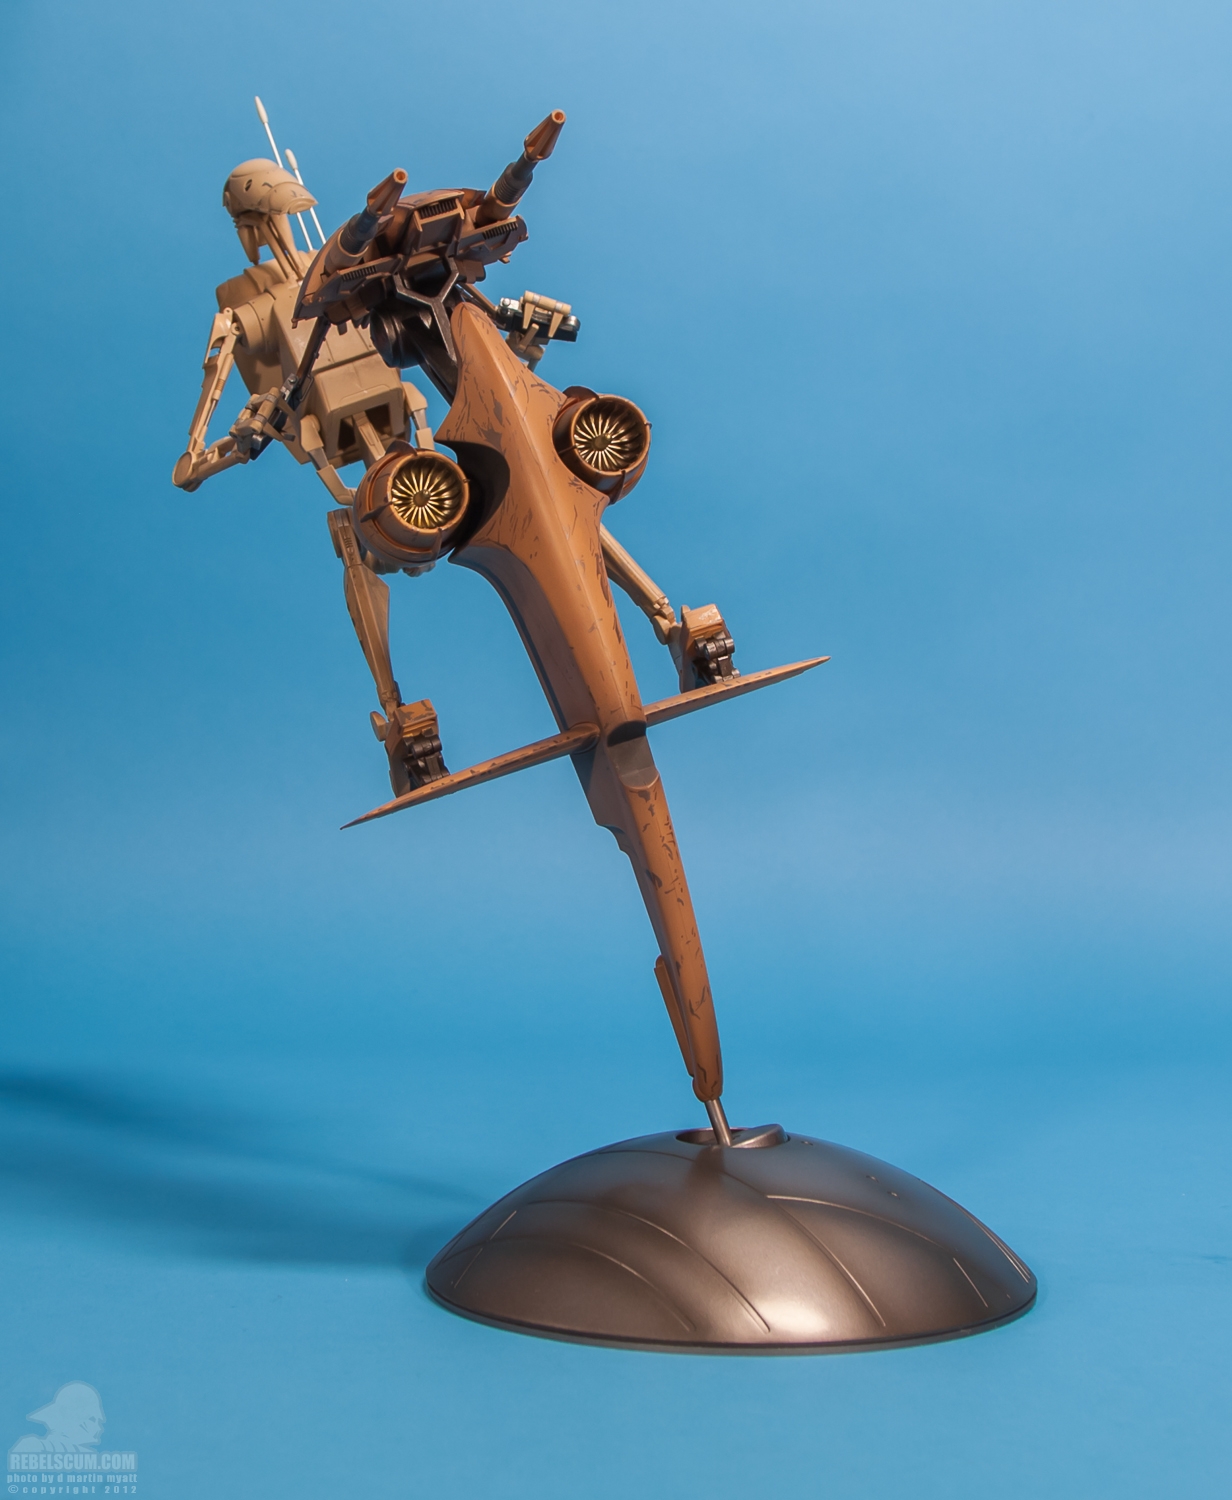 STAP_Battle_Droid_Star_Wars_Sideshow_Collectibles-36.jpg